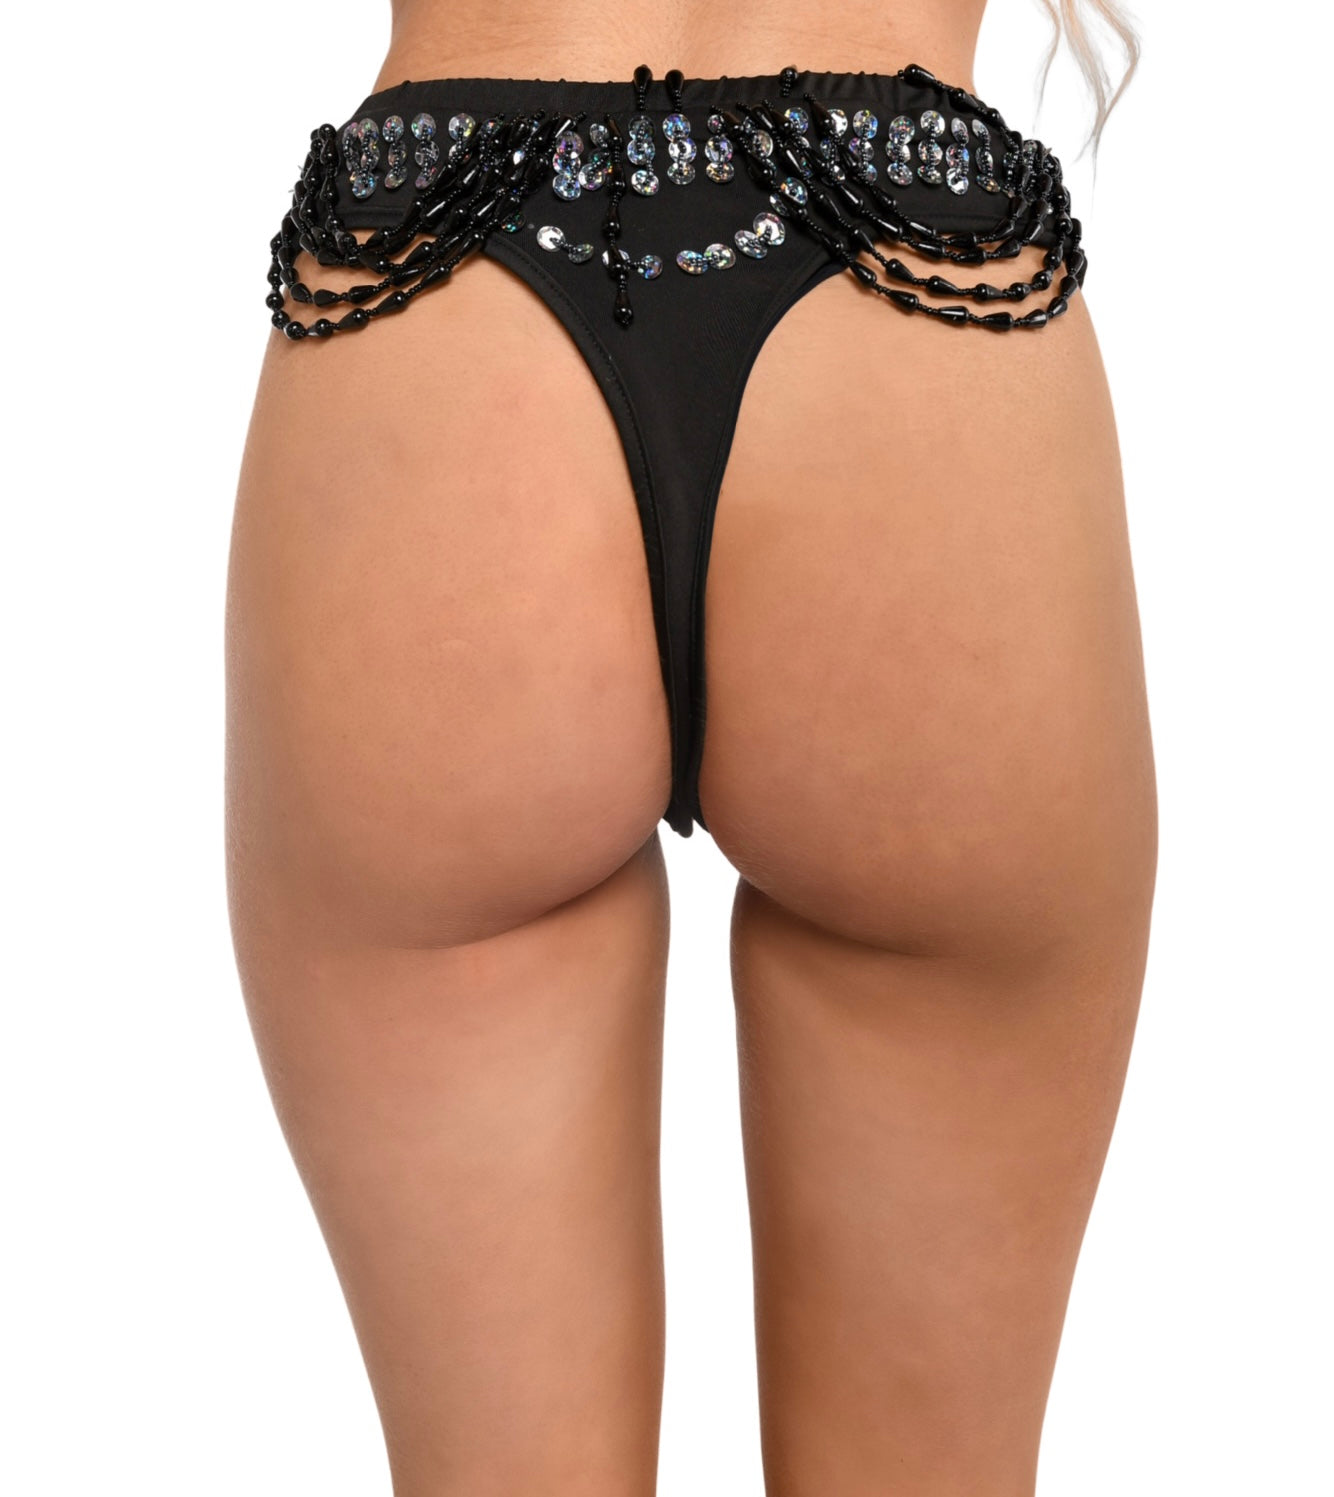 Hand Stitched Sequin Cheeky Bottoms- Disco Barbie